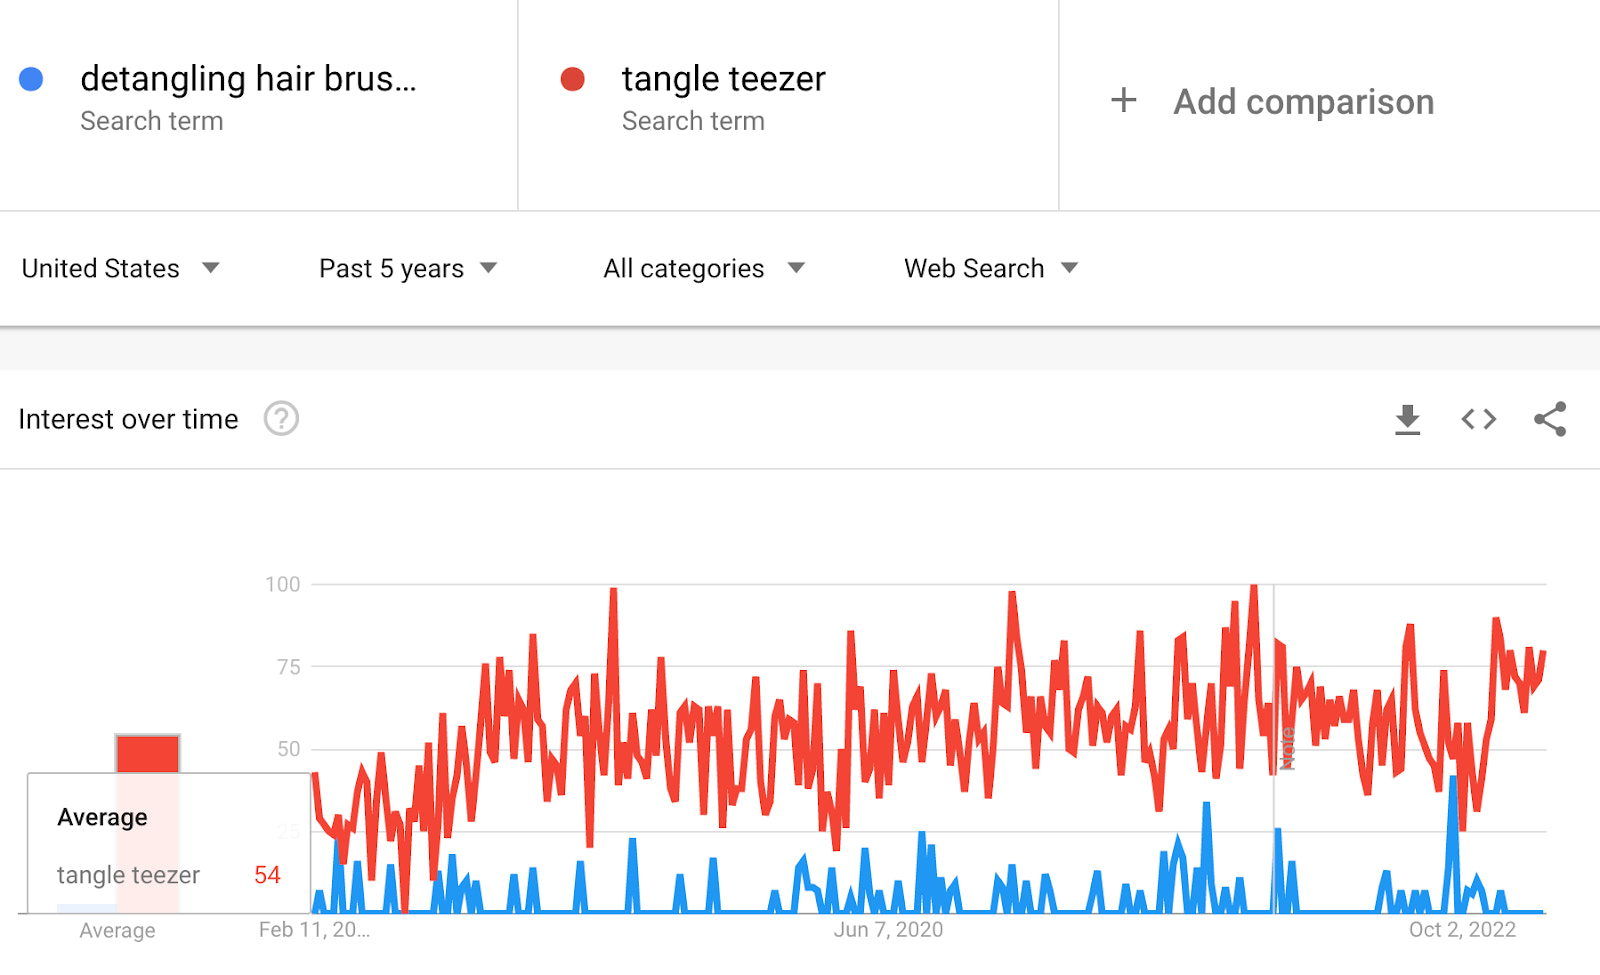 Line chart showing how Tangle Teezer has more monthly searches than detangling hair brush.